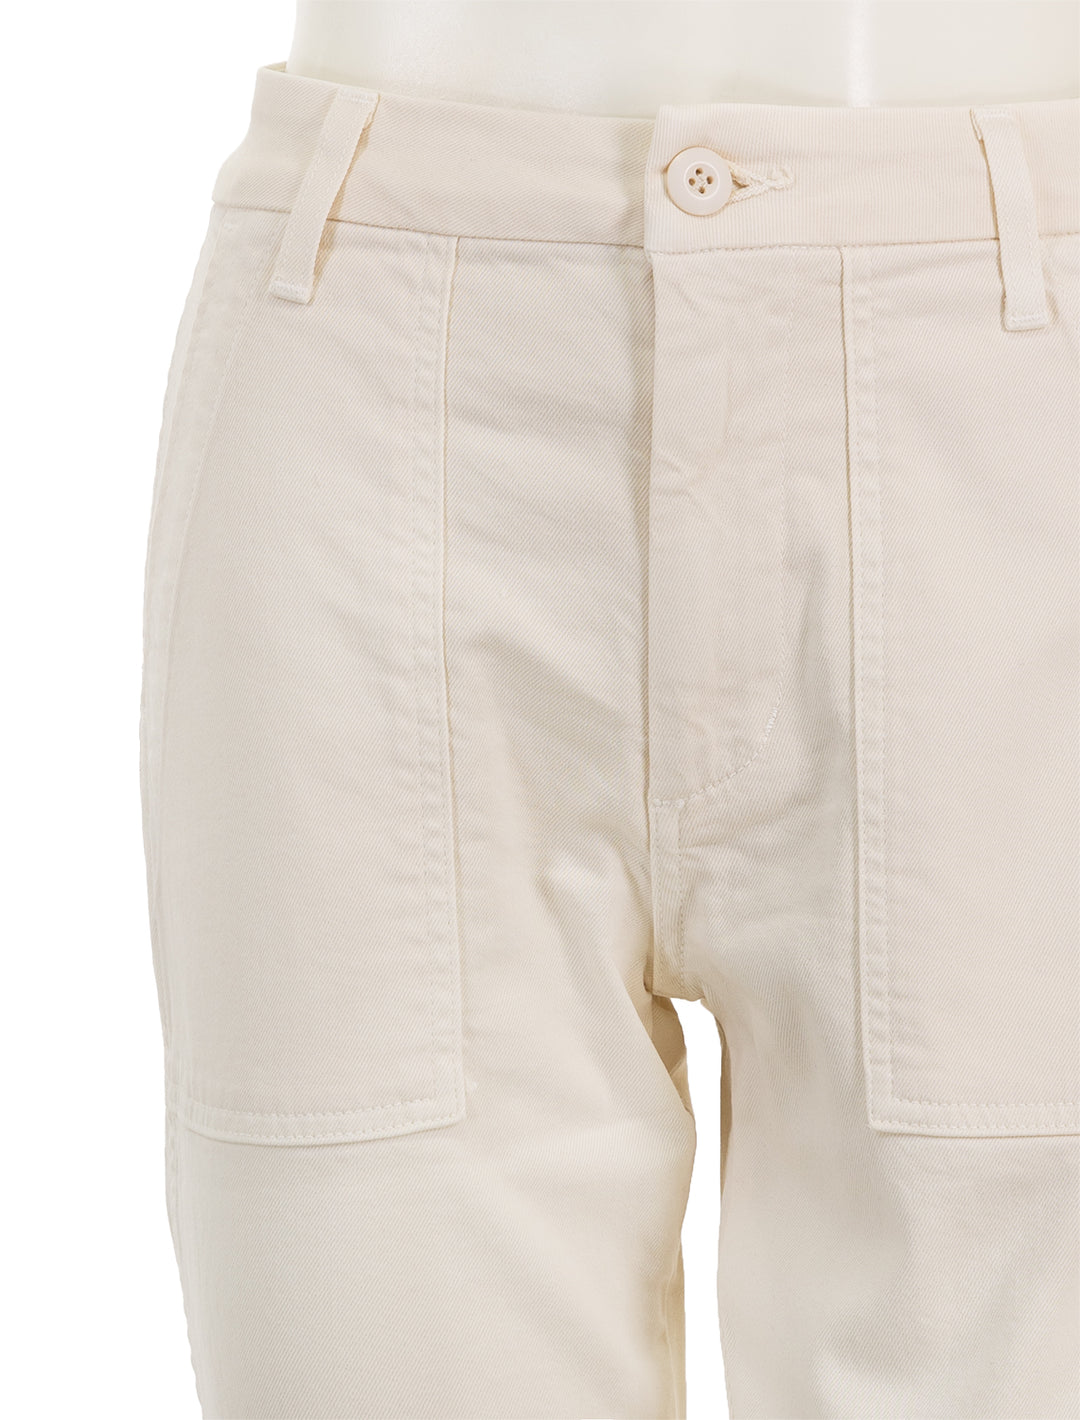 Close-up view of AMO's easy army trousers in bone.